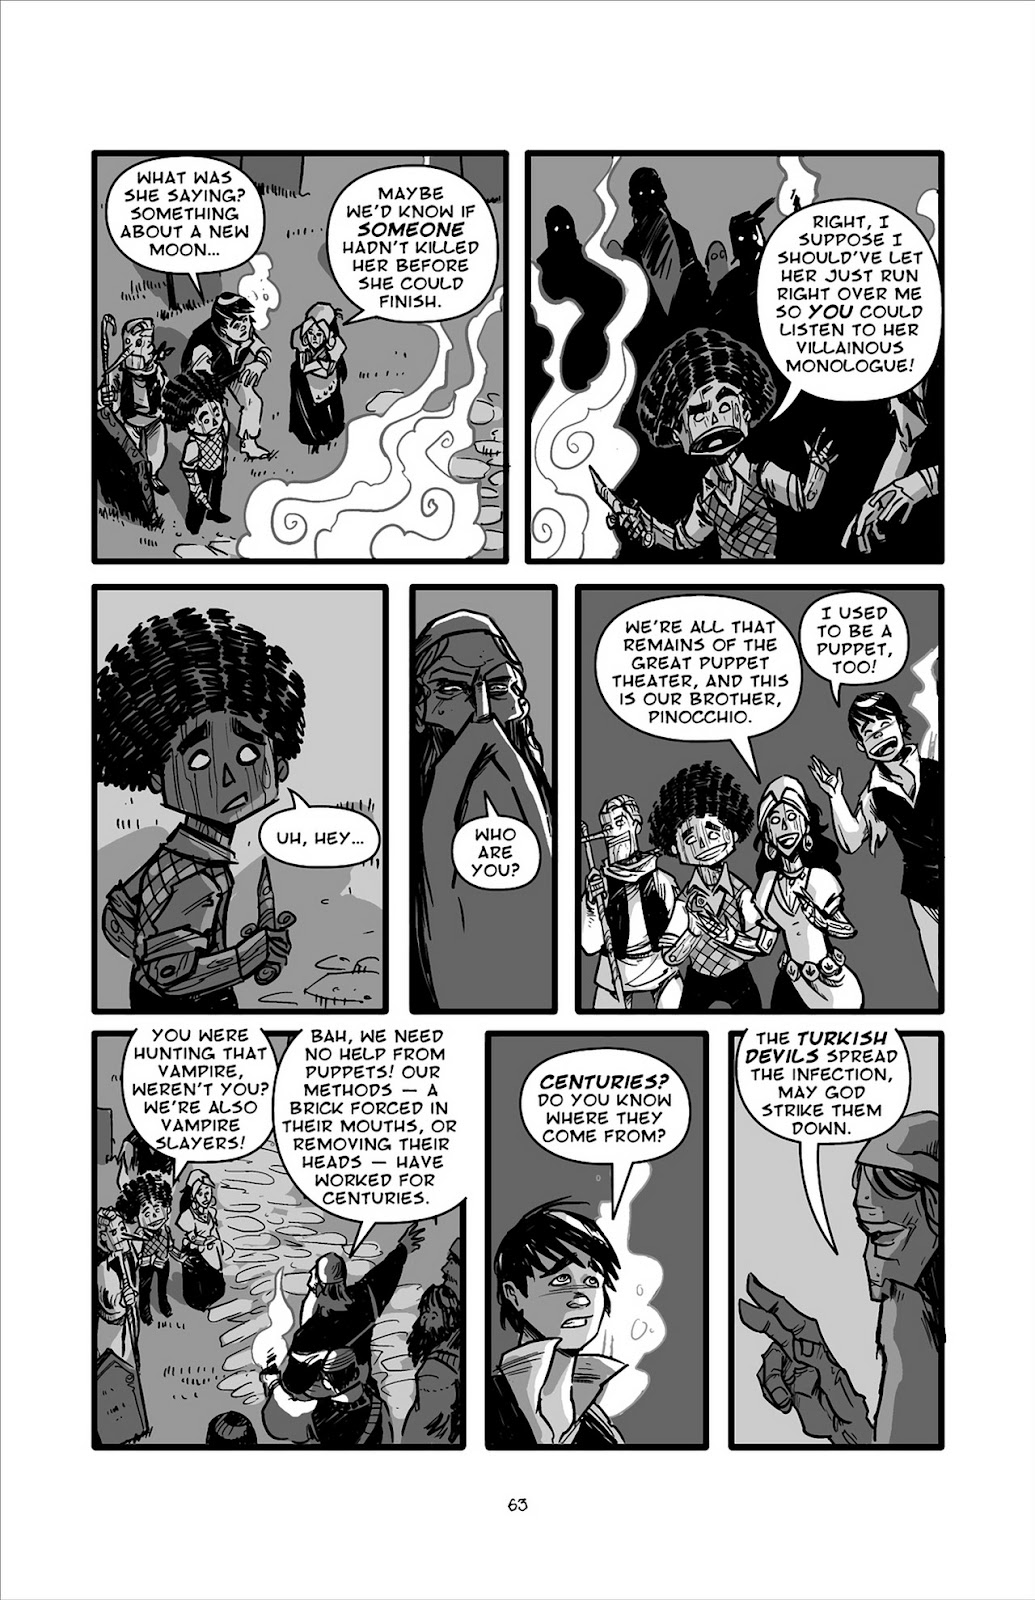 Pinocchio: Vampire Slayer - Of Wood and Blood issue 3 - Page 14